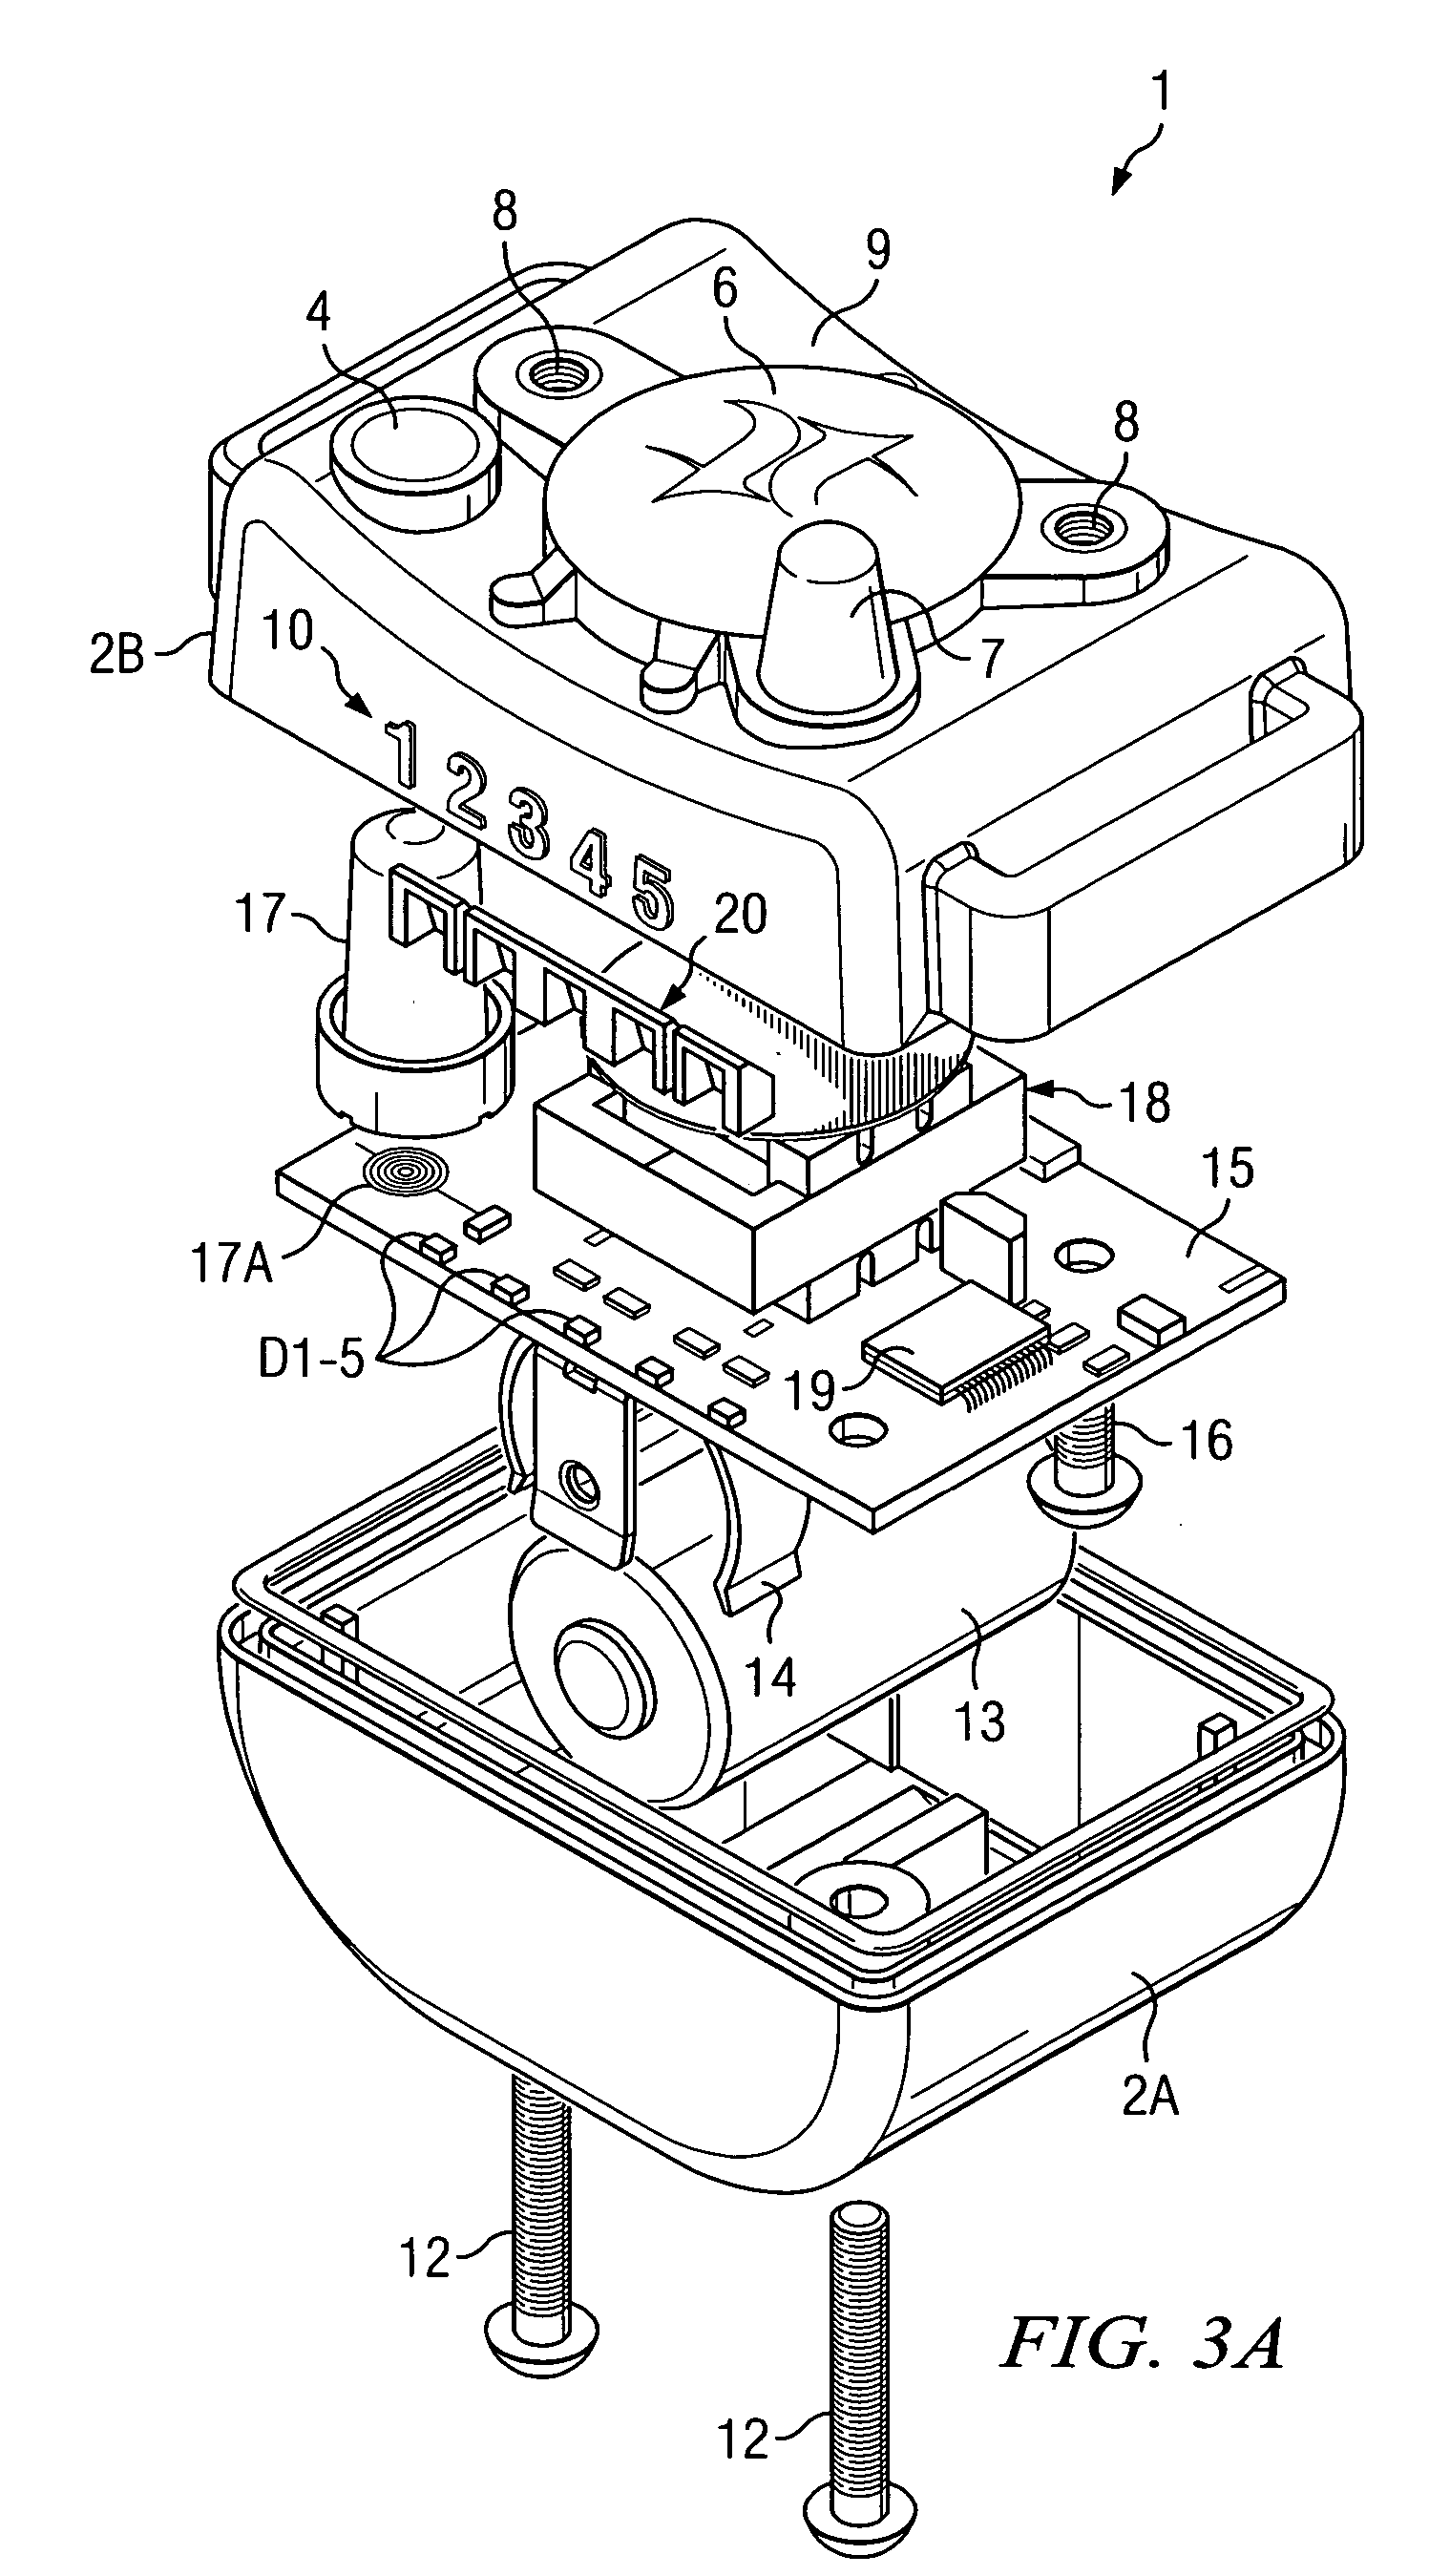 Barking episode counter and method for bark control device